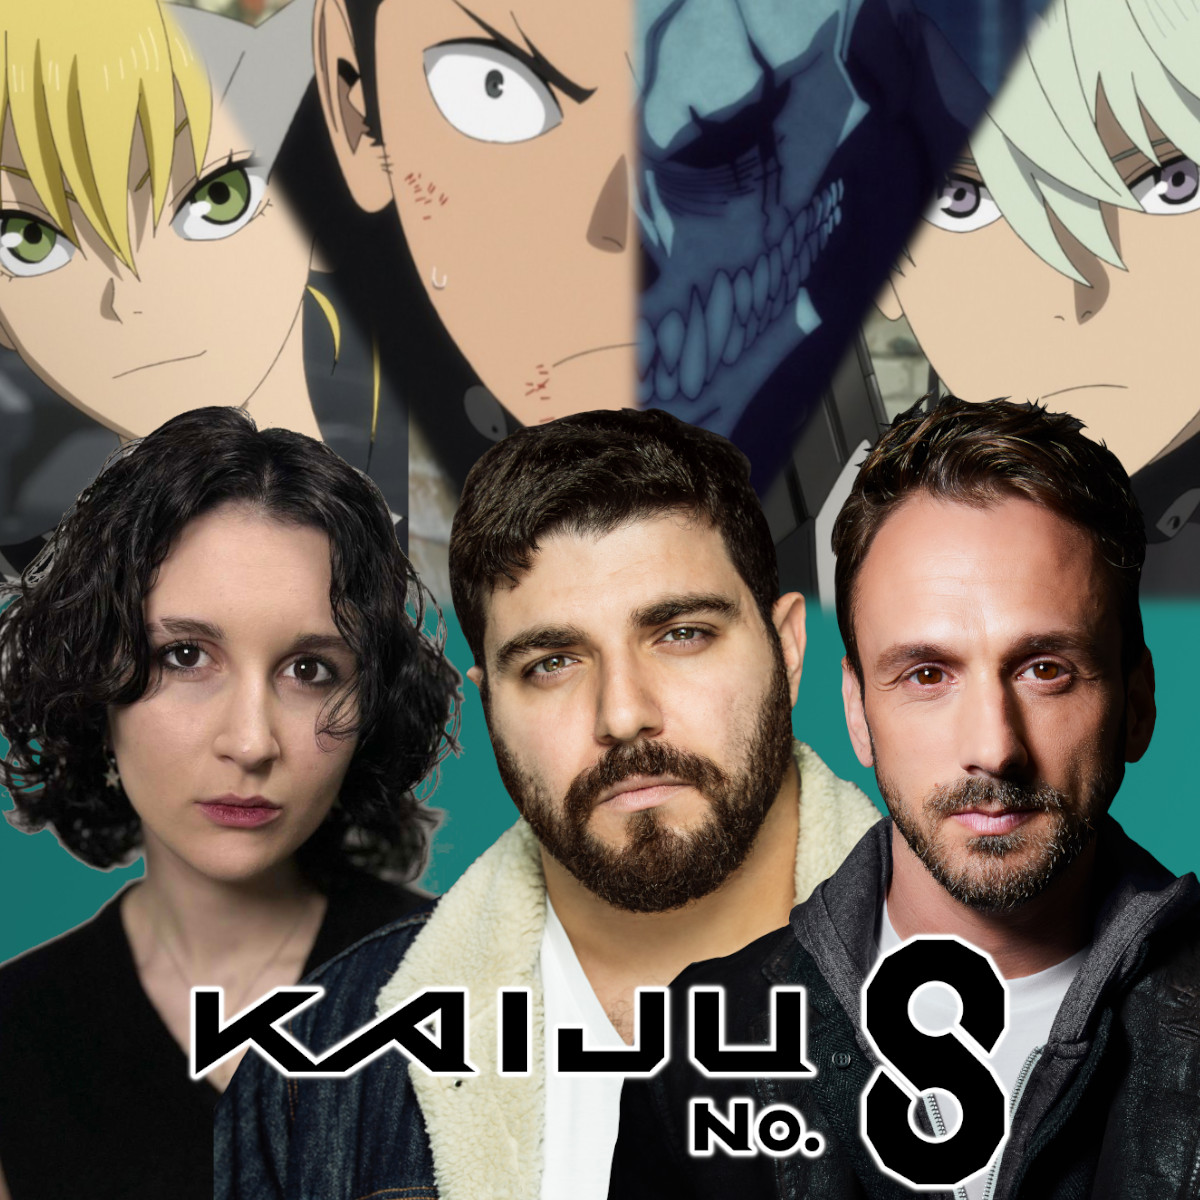 Thumbnail image for an interview with the English cast of Kaiju No. 8. From left to right: Abigail Blythe, Nazeeh Tarsha, and Adam McArthur.